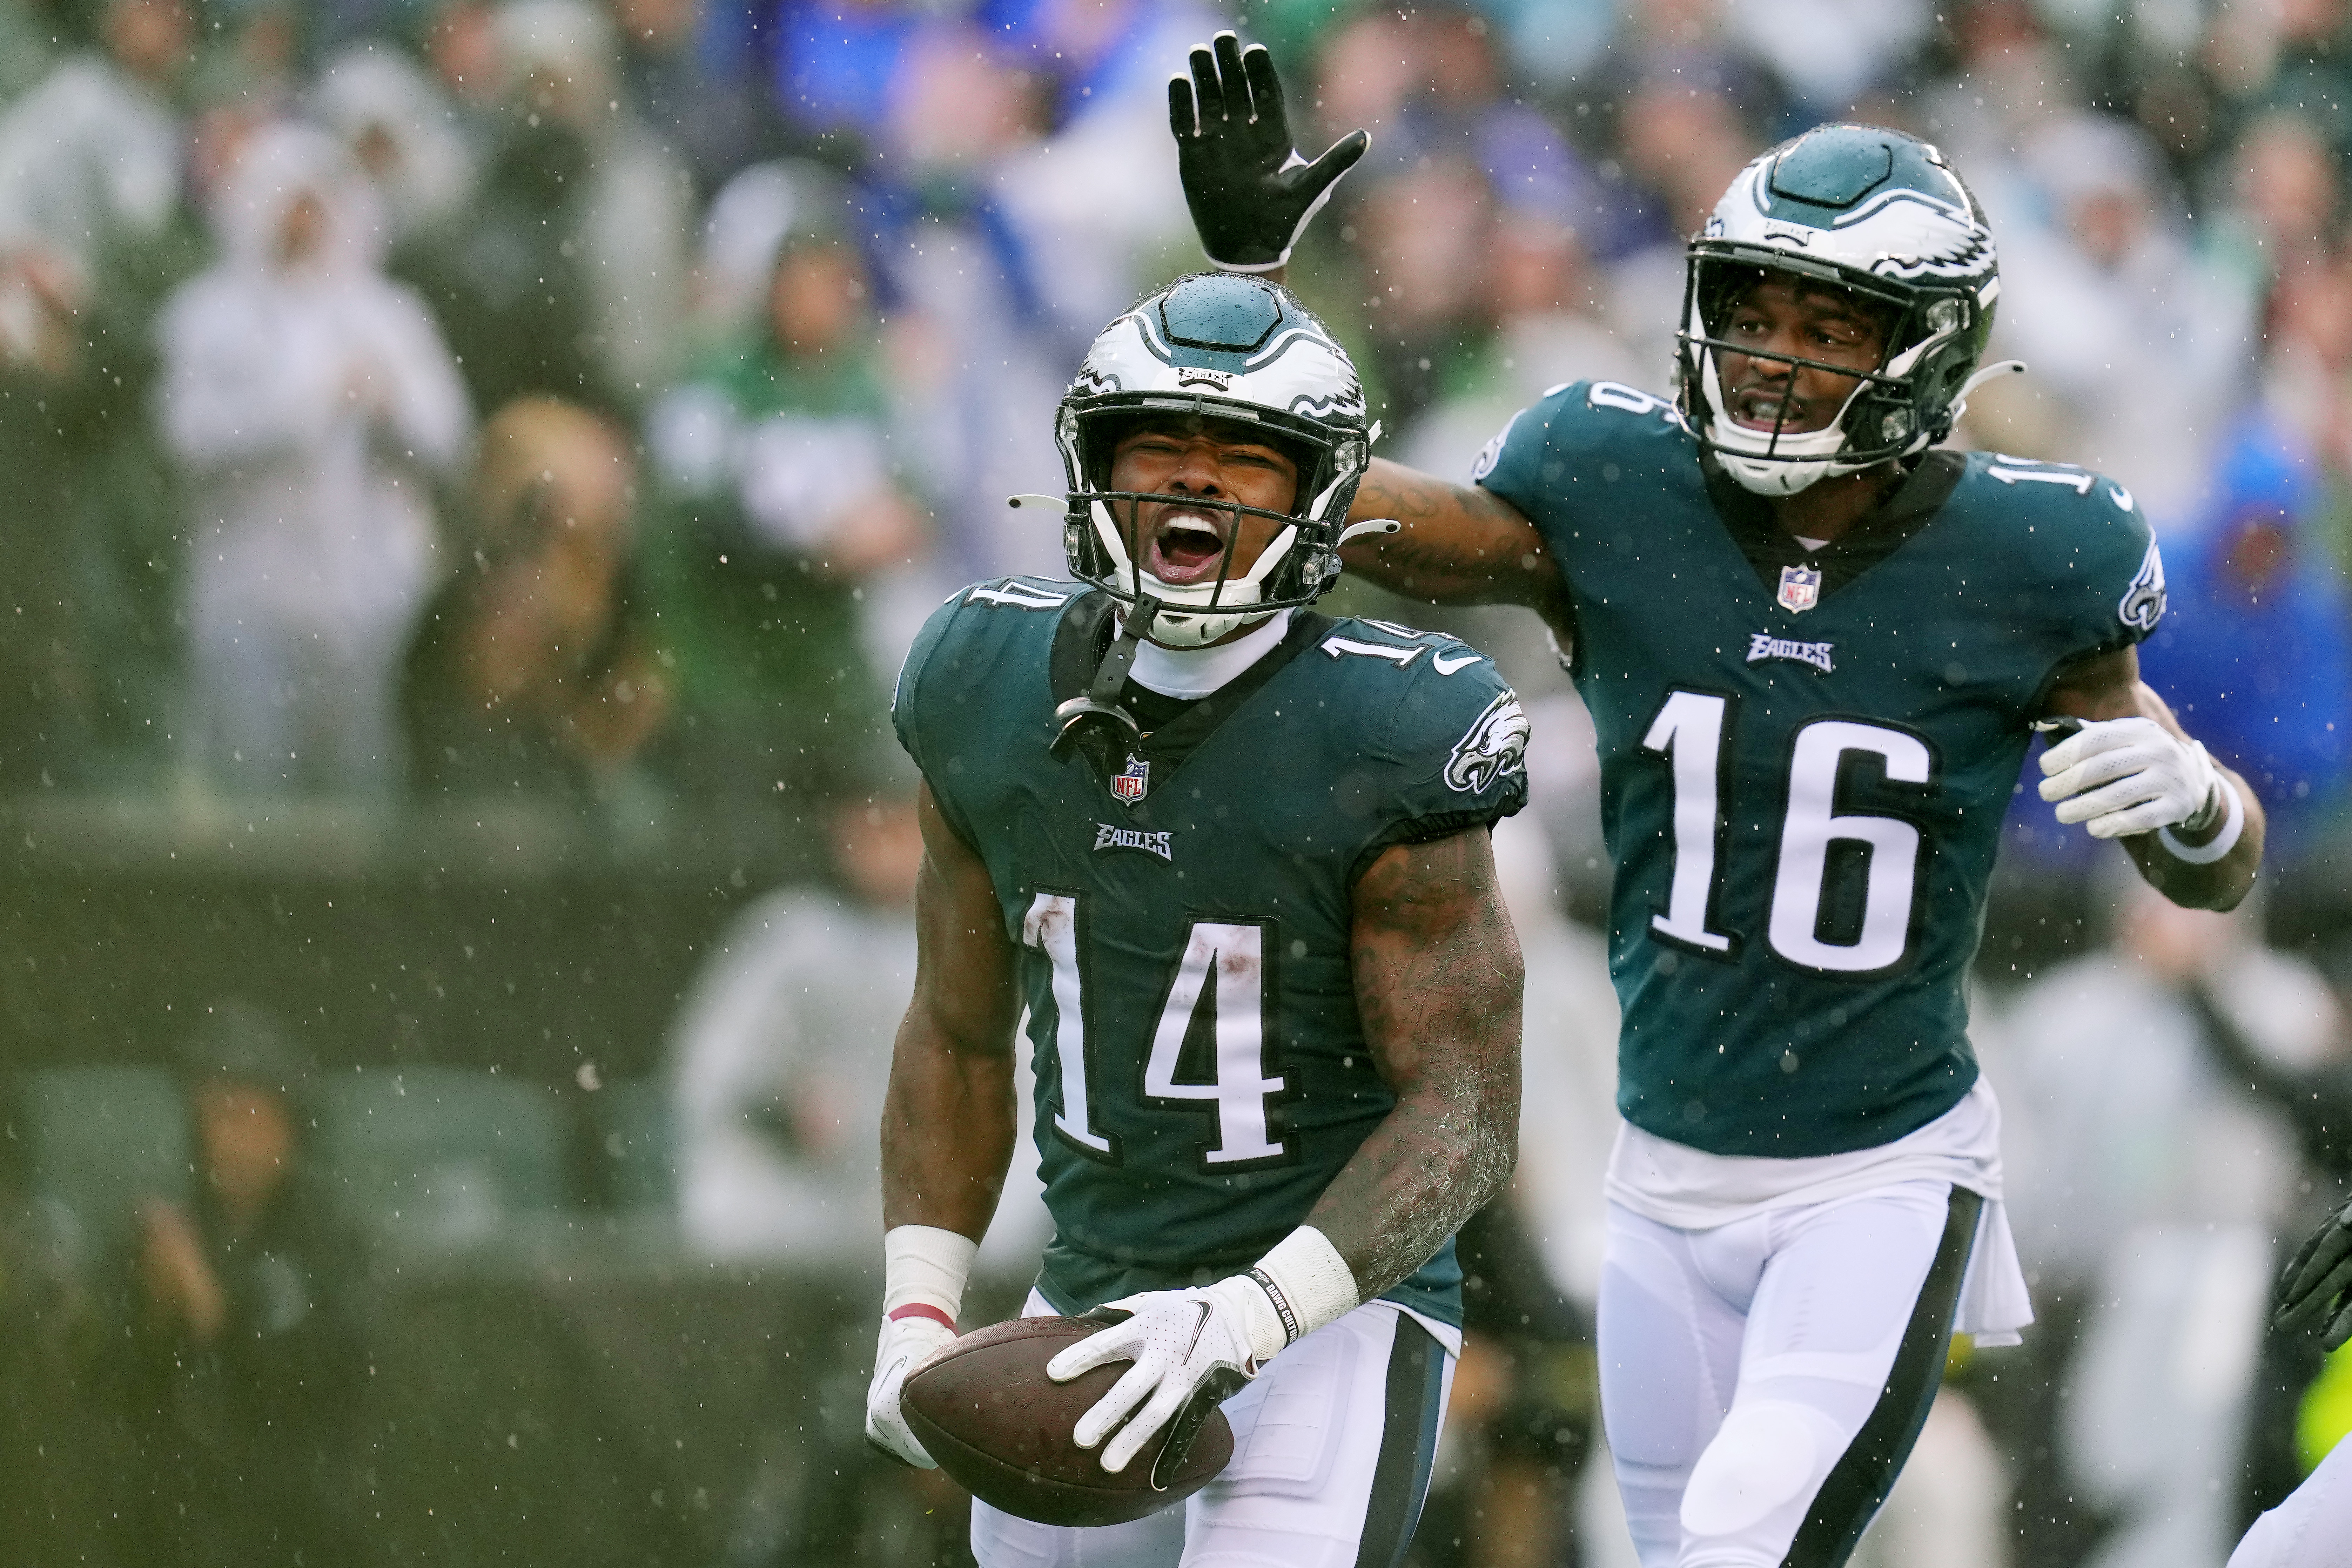 NFL Week 8 survivor pool picks, predictions: Fly with the unbeaten Eagles